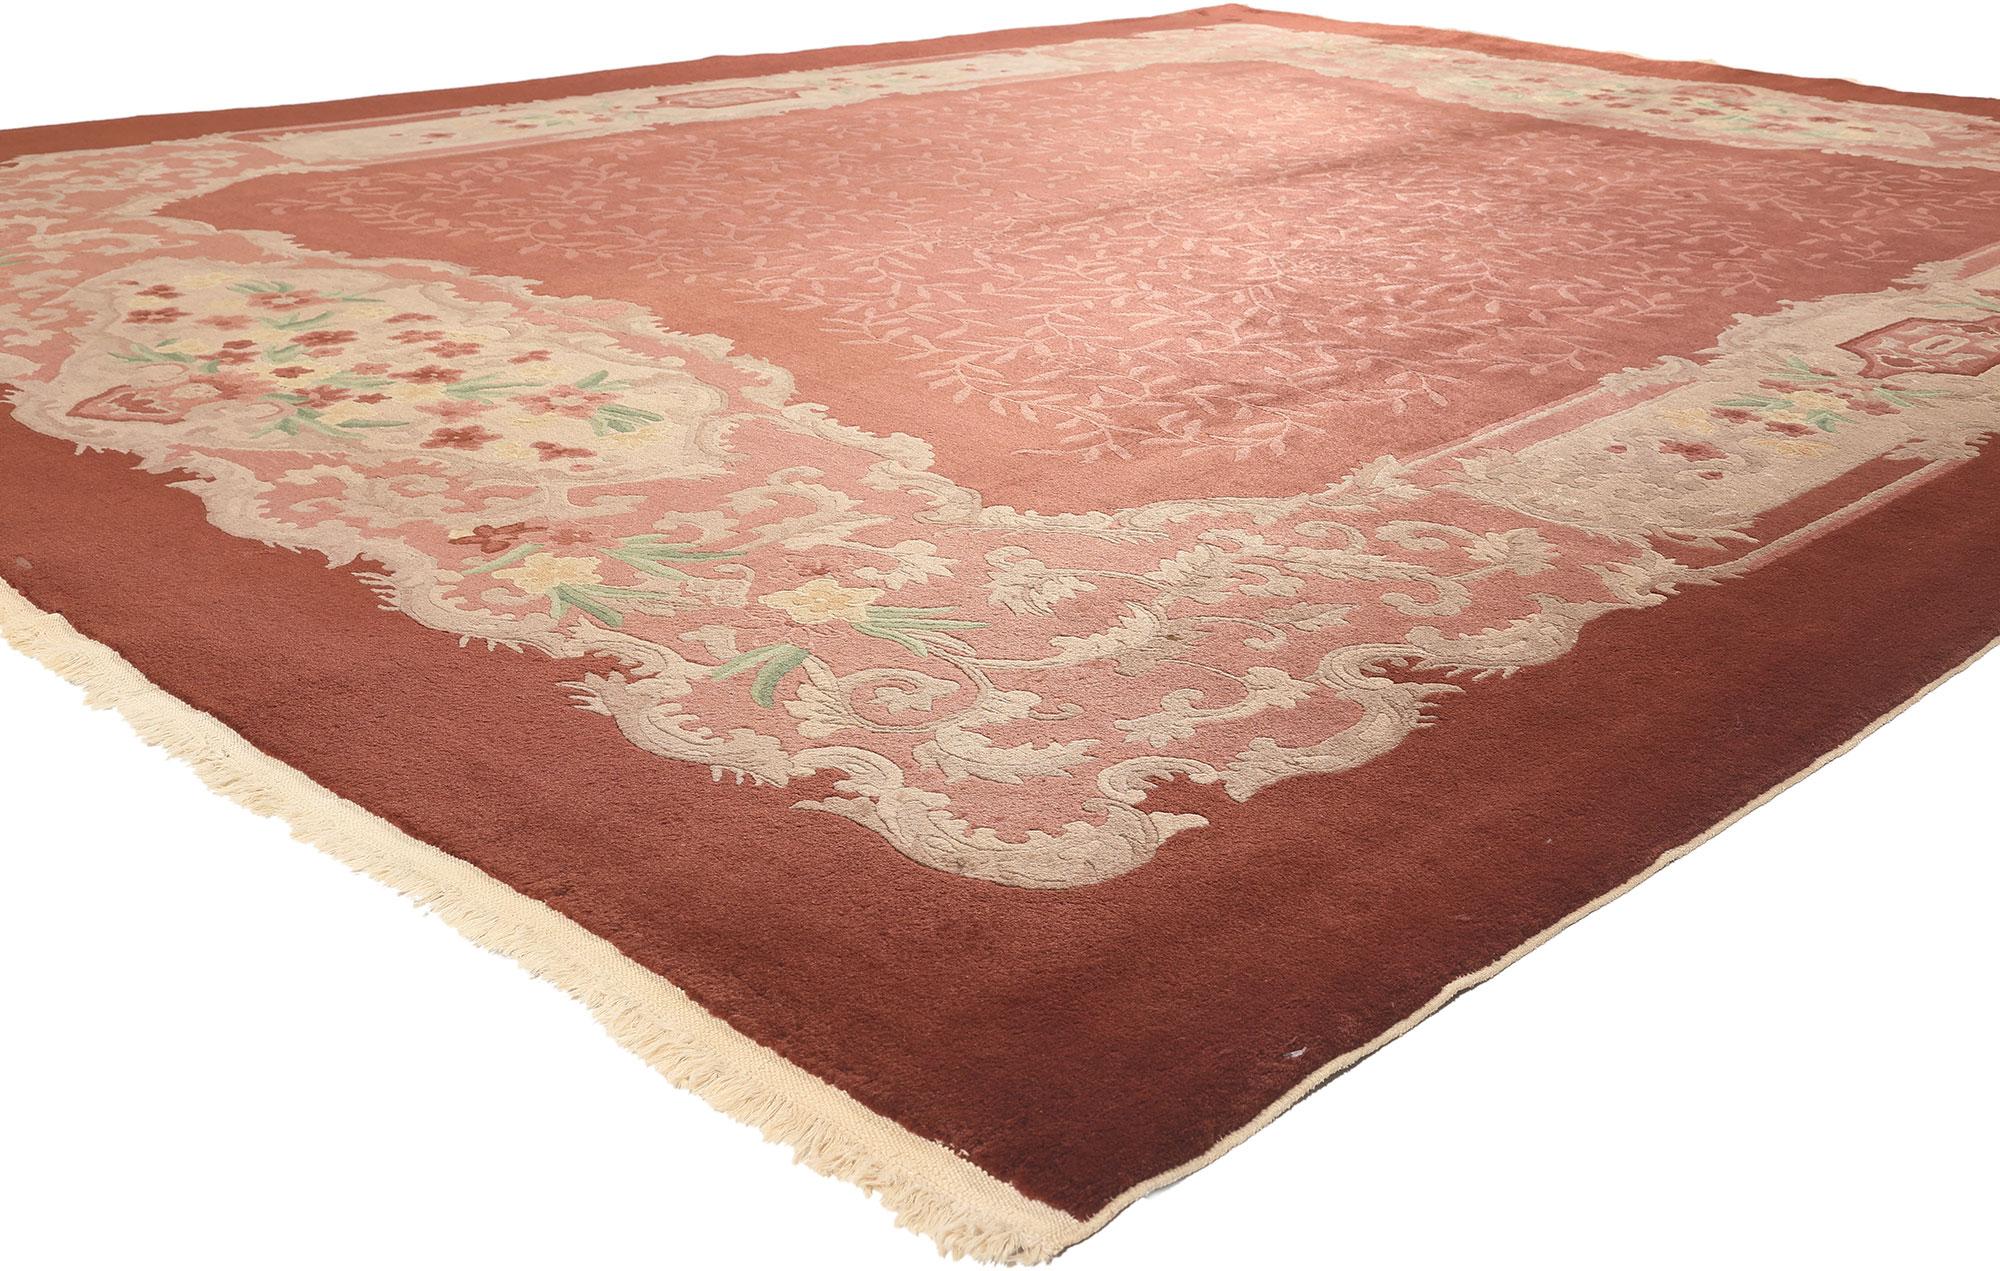 70603 Antique Chinese Art Deco Rug, 09'01 x 11'09.
French European meets Chinoiserie chic in this hand knotted wool antique Chinese Art Deco rug. The intrinsic botanical design and rustic earthy hues woven into this piece work together cultivating